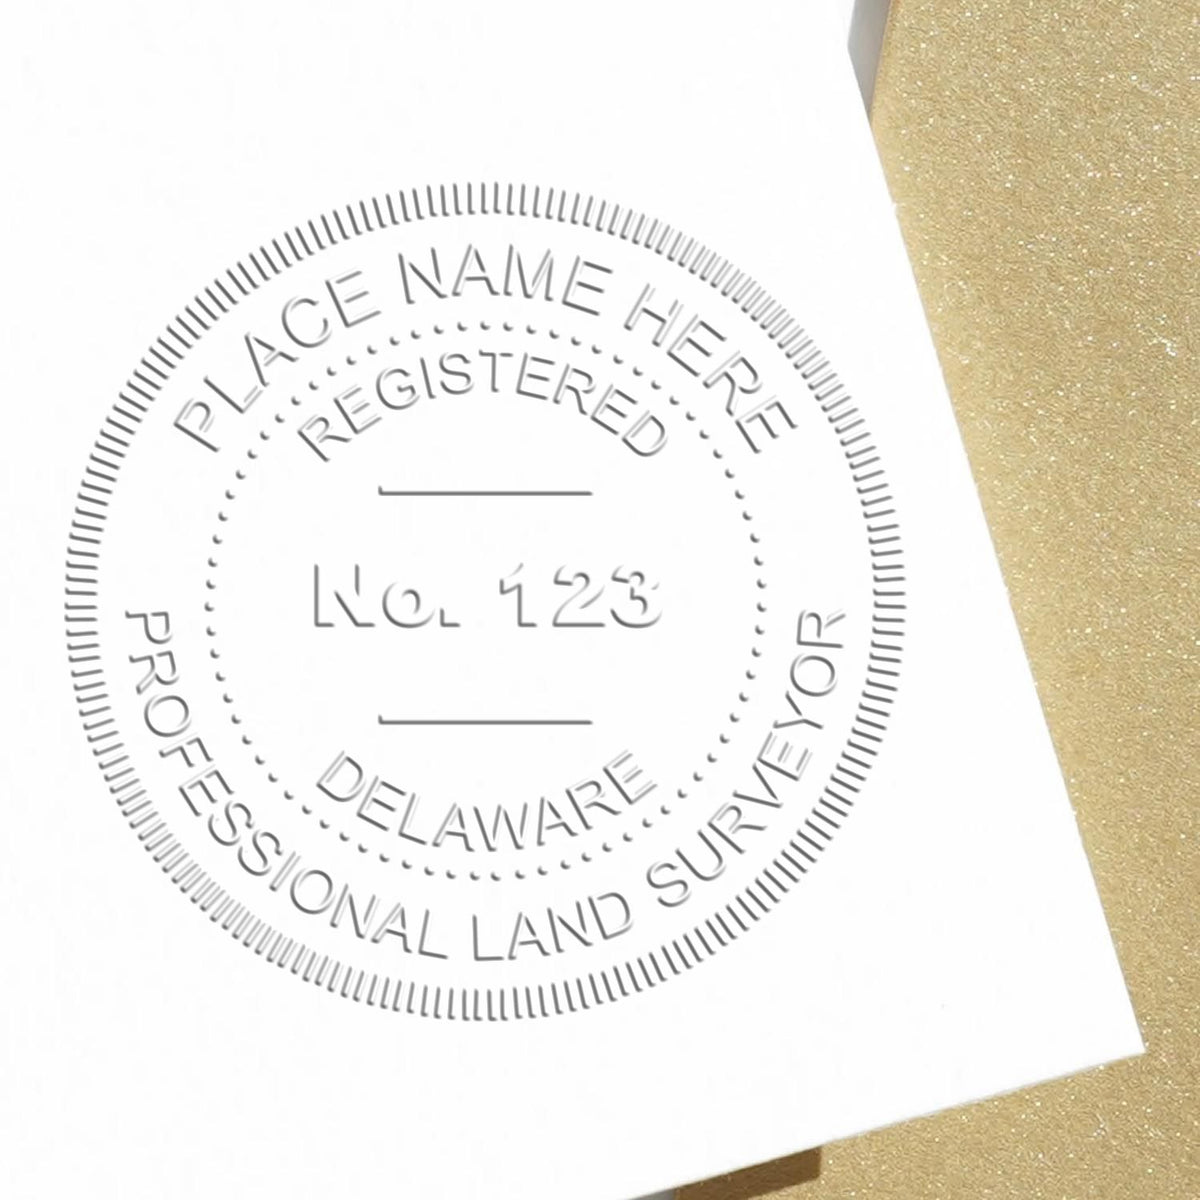 The Gift Delaware Land Surveyor Seal stamp impression comes to life with a crisp, detailed image stamped on paper - showcasing true professional quality.